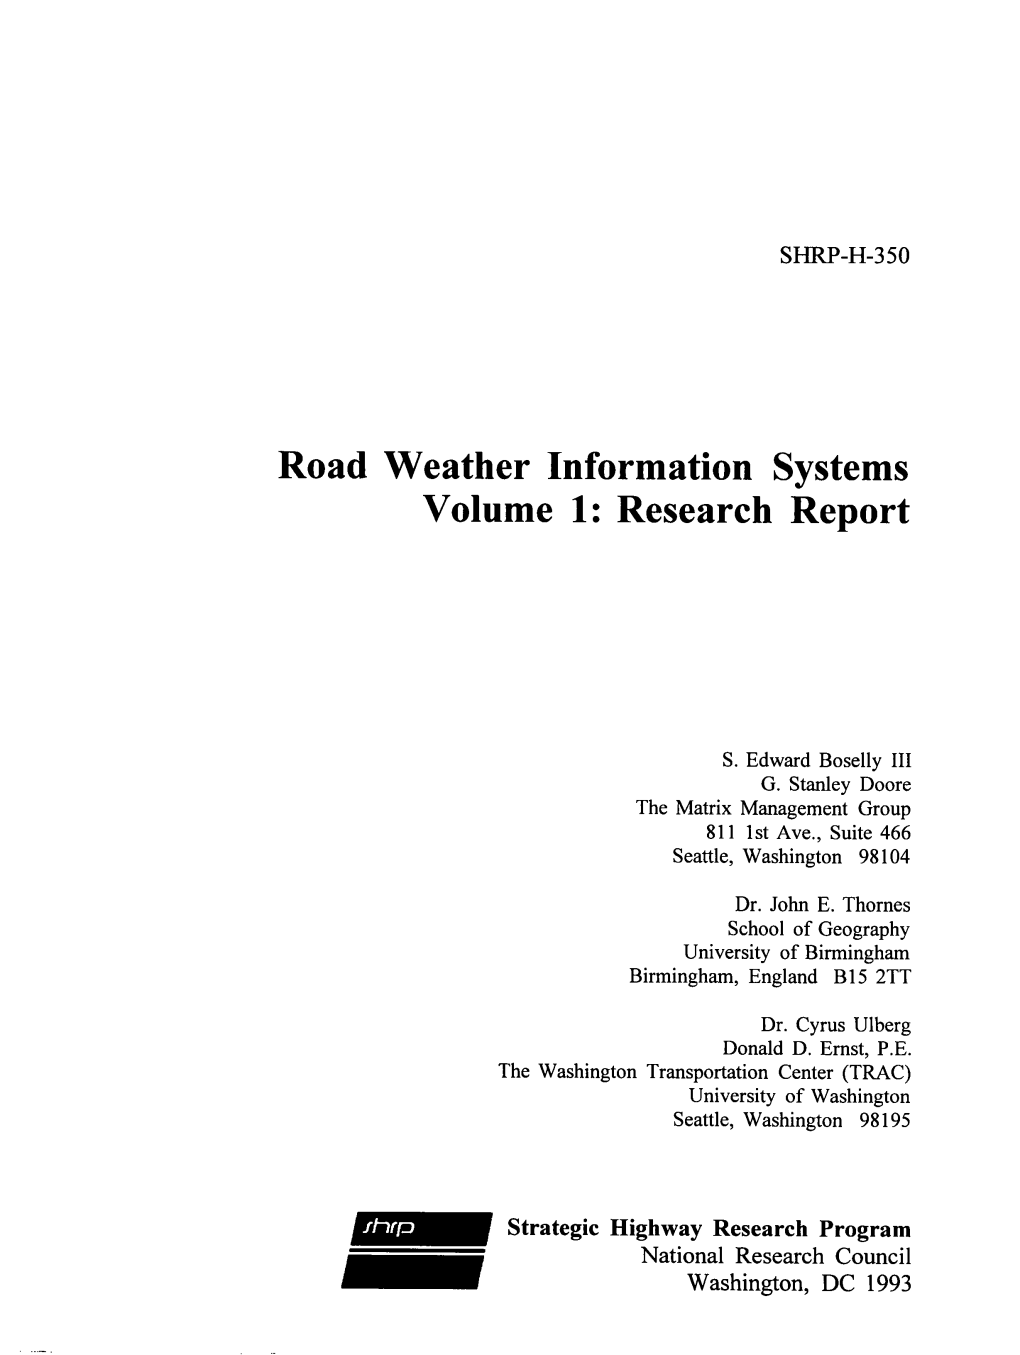 Road Weather Information Systems Volume 1: Research Report